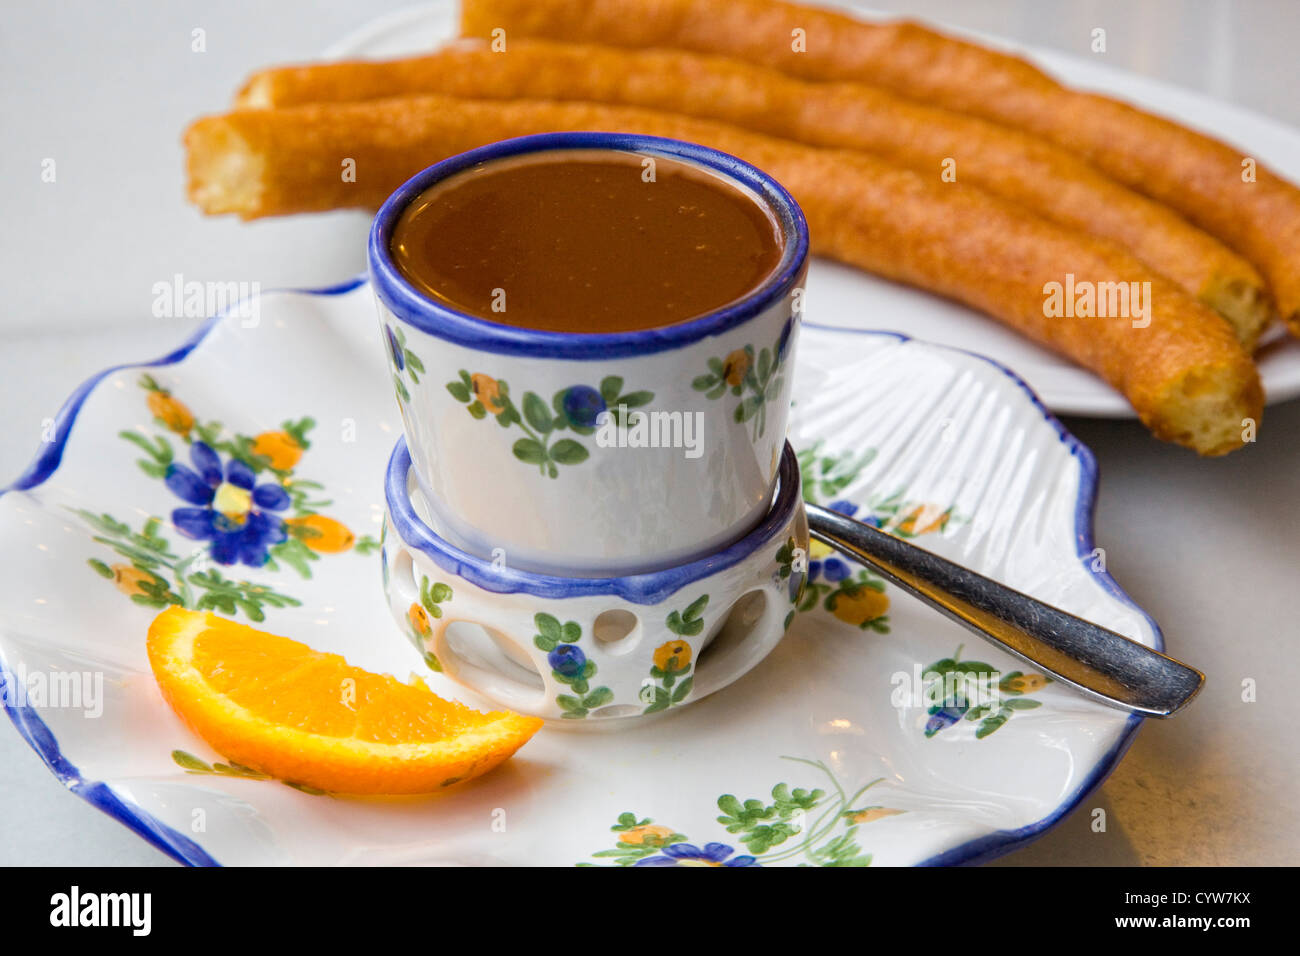 Hot chocolate served in a decorated porcelain cup, with spanish porras Stock Photo